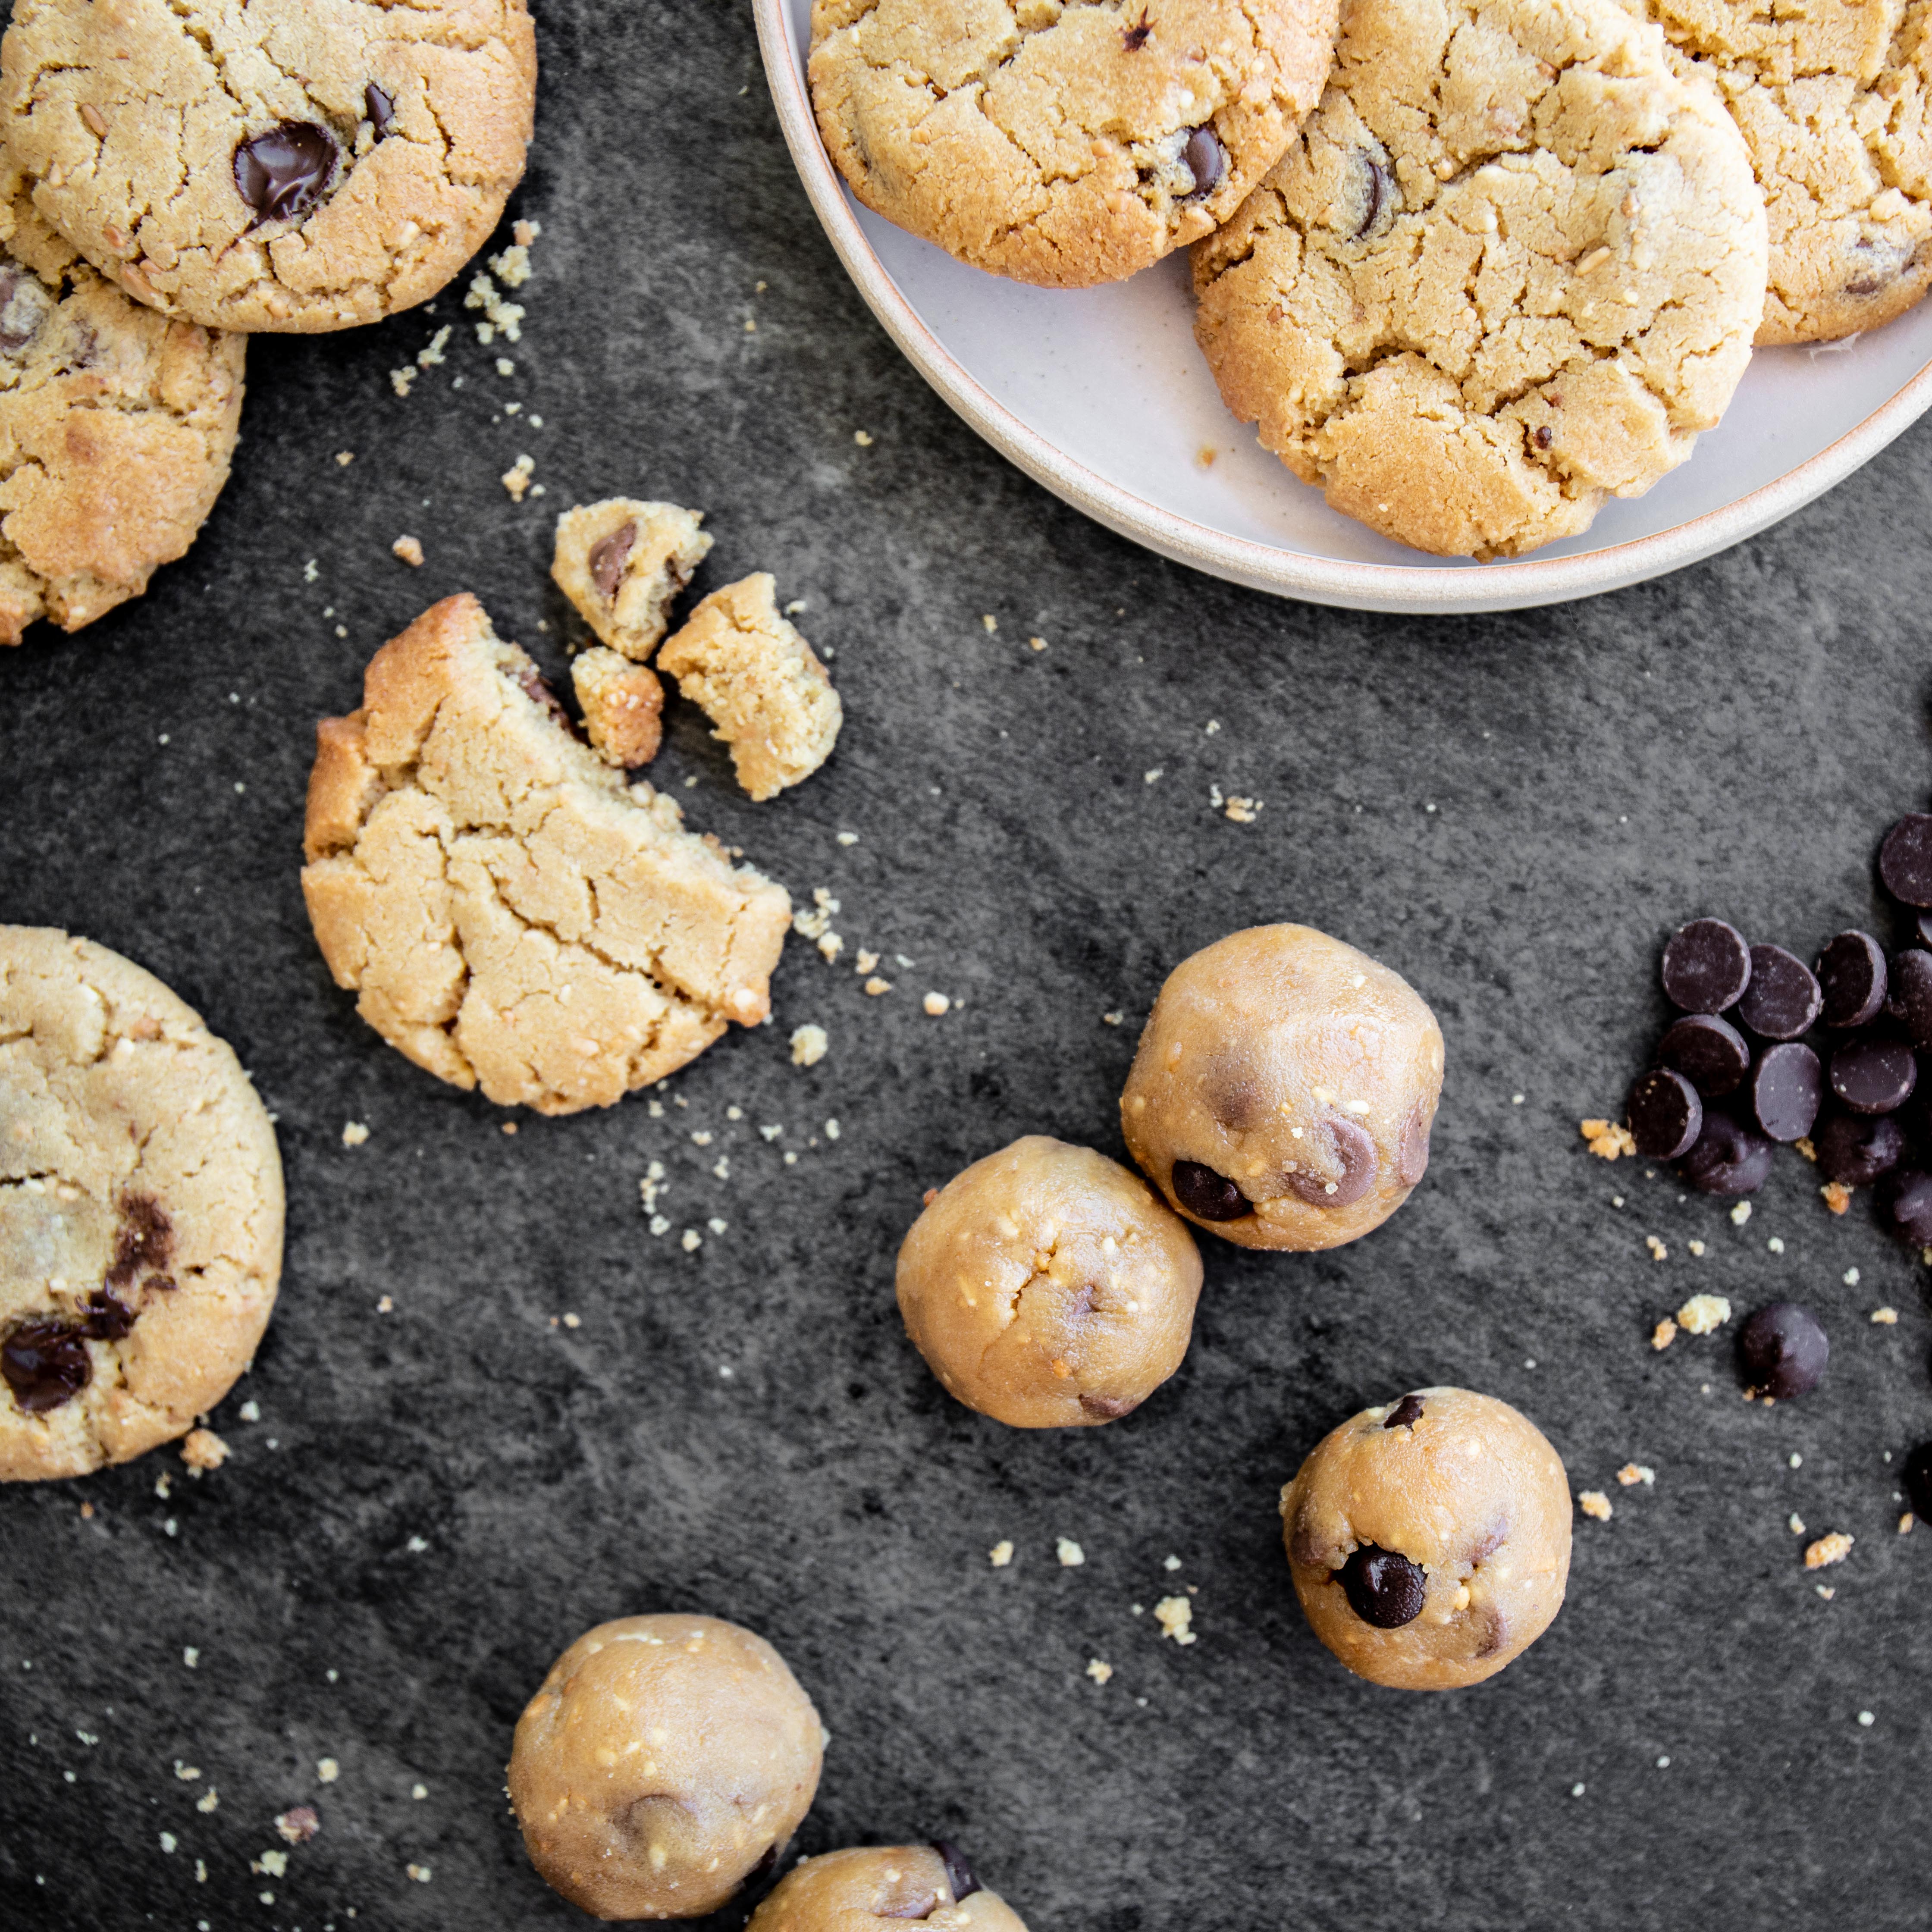 Peanut Butter Chocolate Chip Cookies - Recipe and Food Photography by Shika Finnemore, The Bellephant